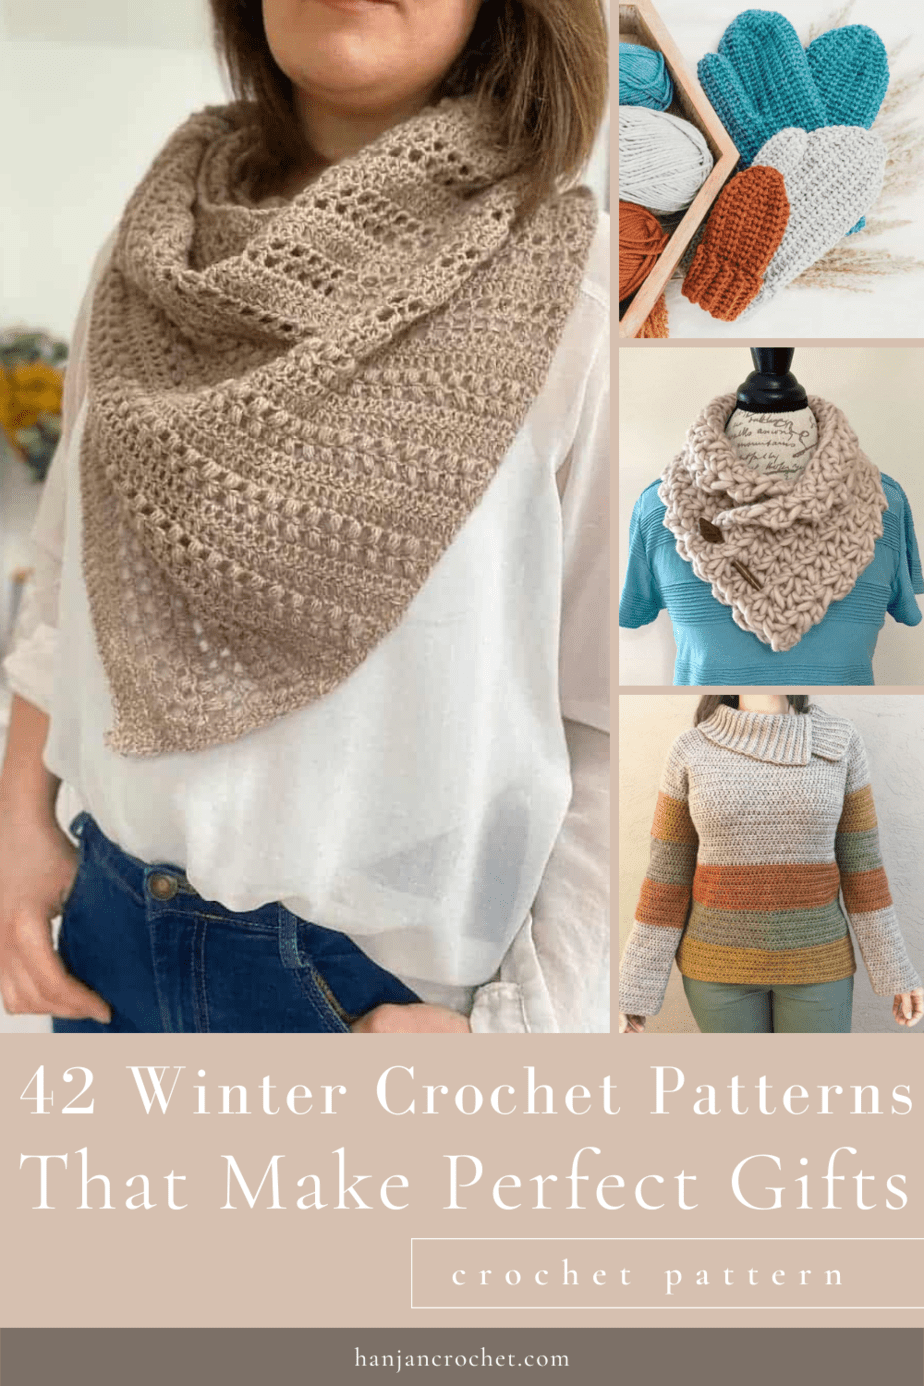 Collage of winter crochet garments: scarf, sweater and mittens.